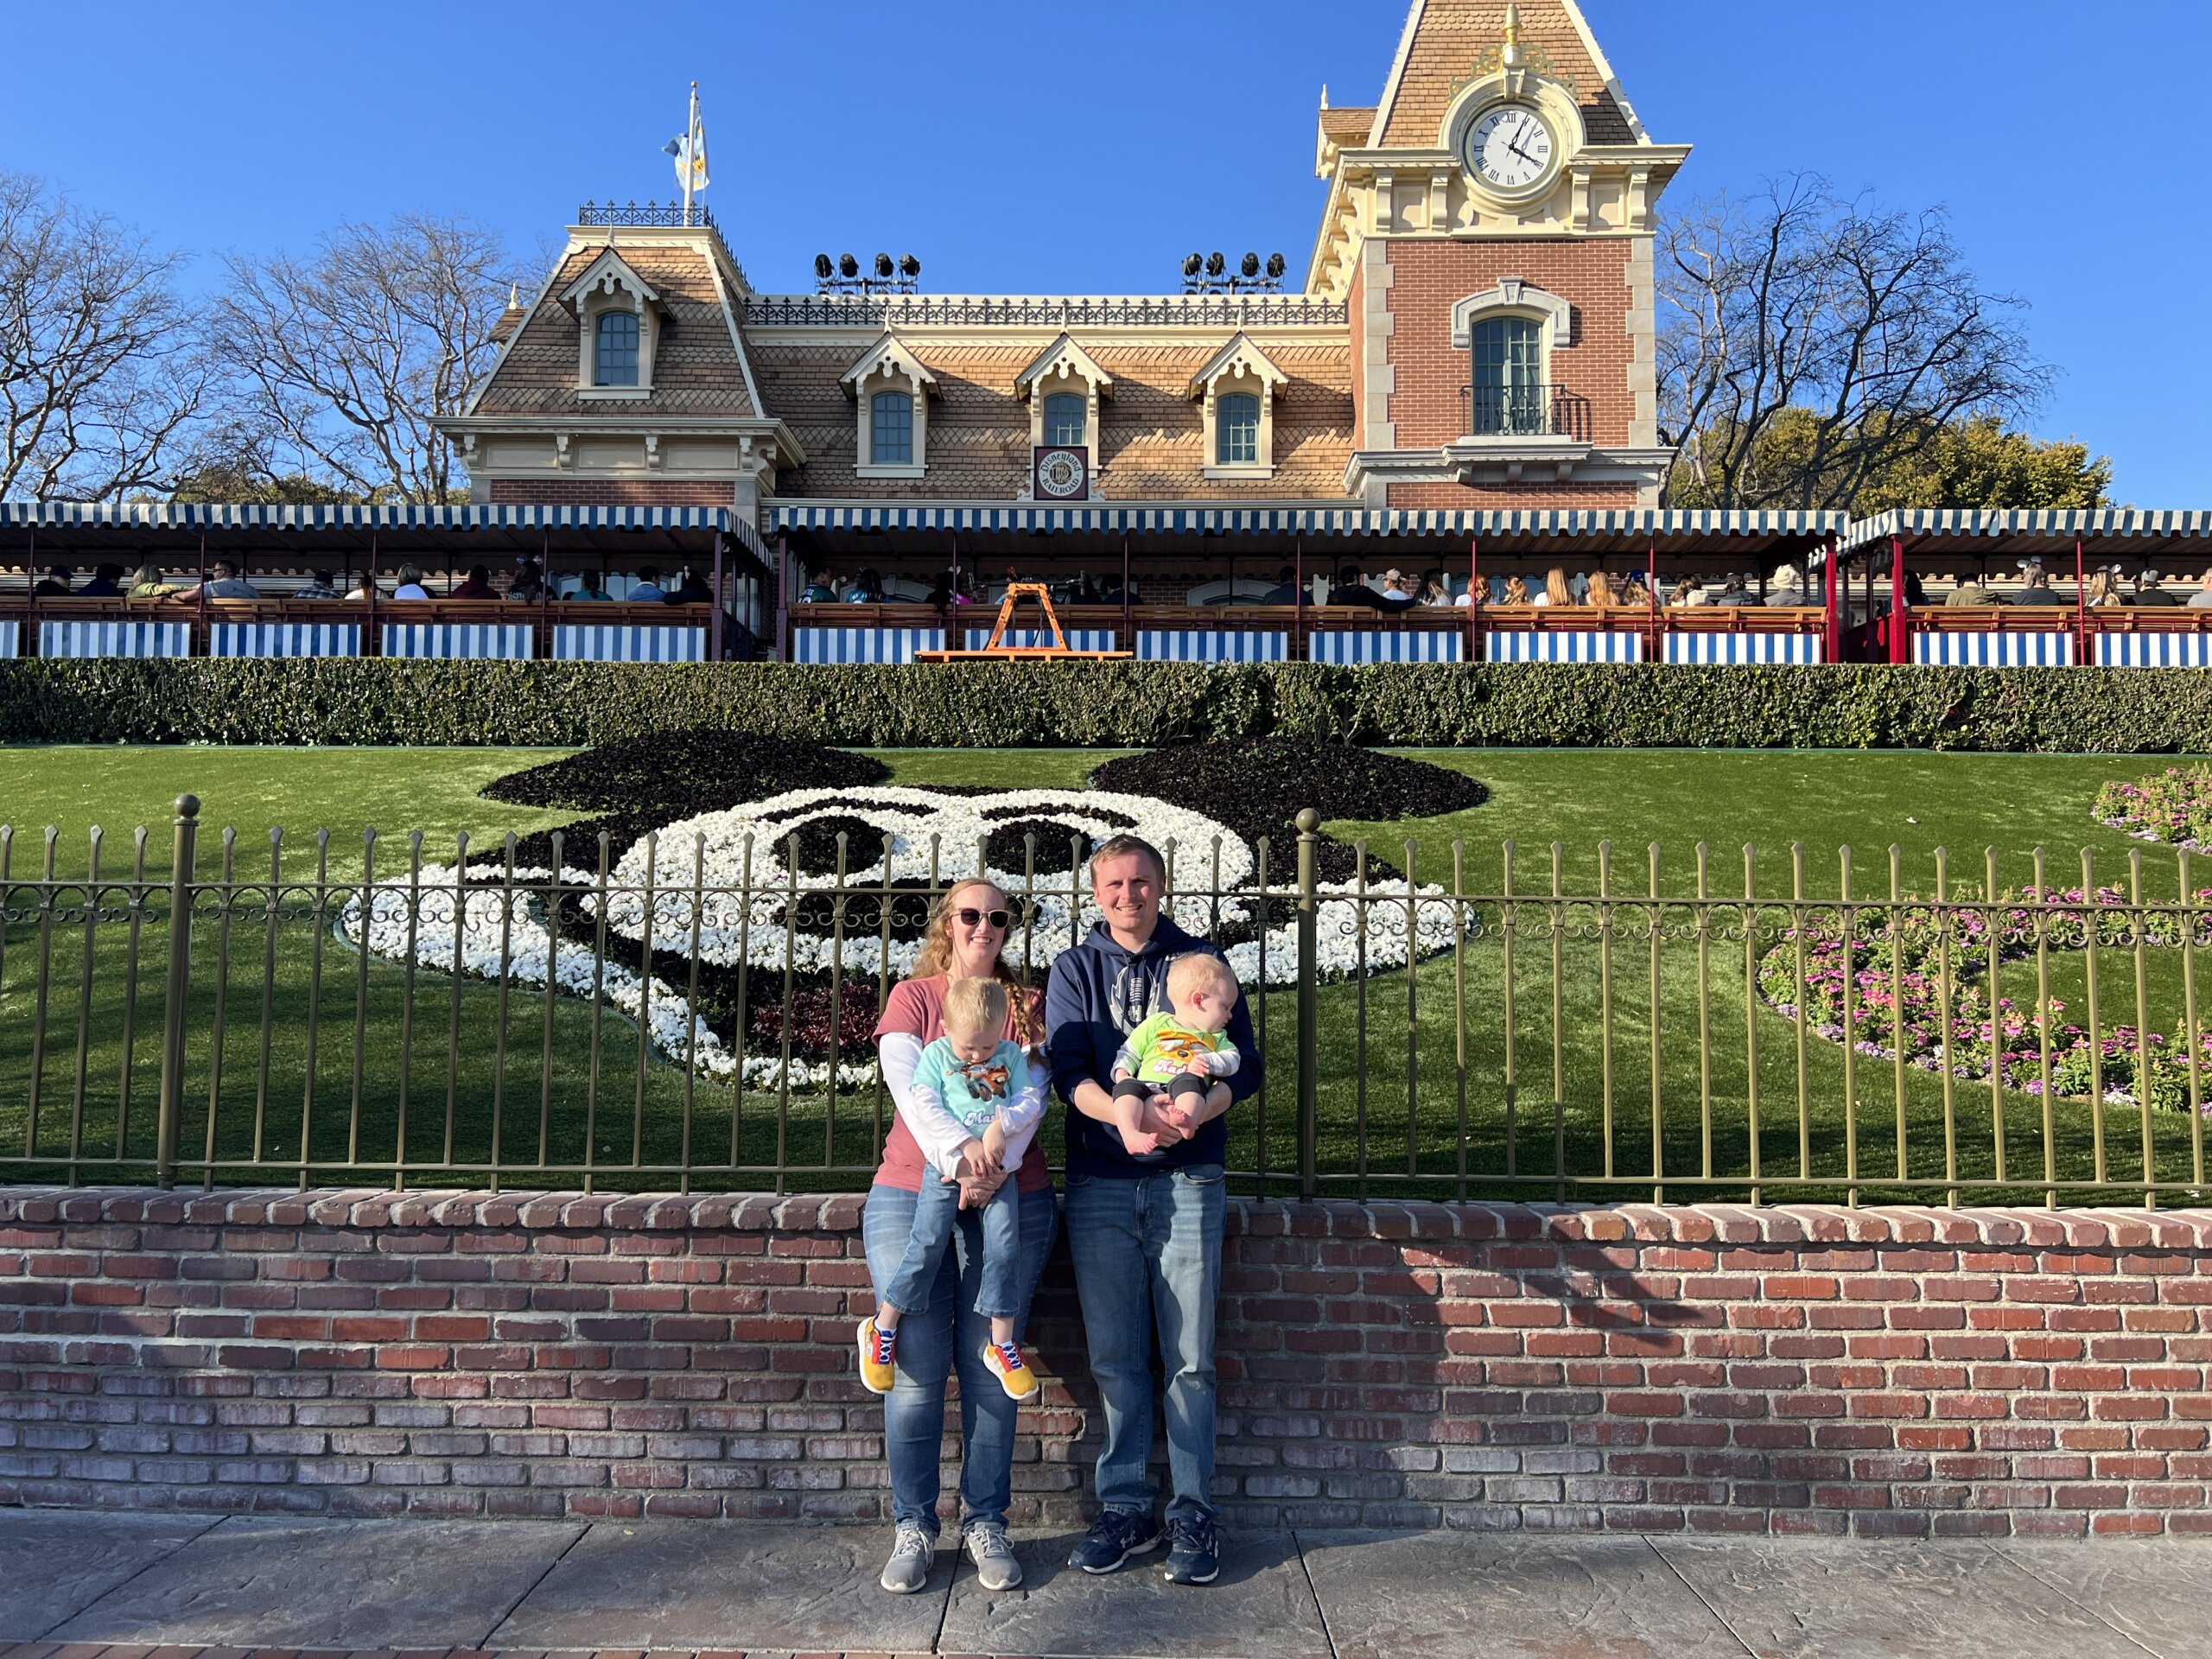 Man and woman holding children standing outside building with Mickey Mouse on lawn.